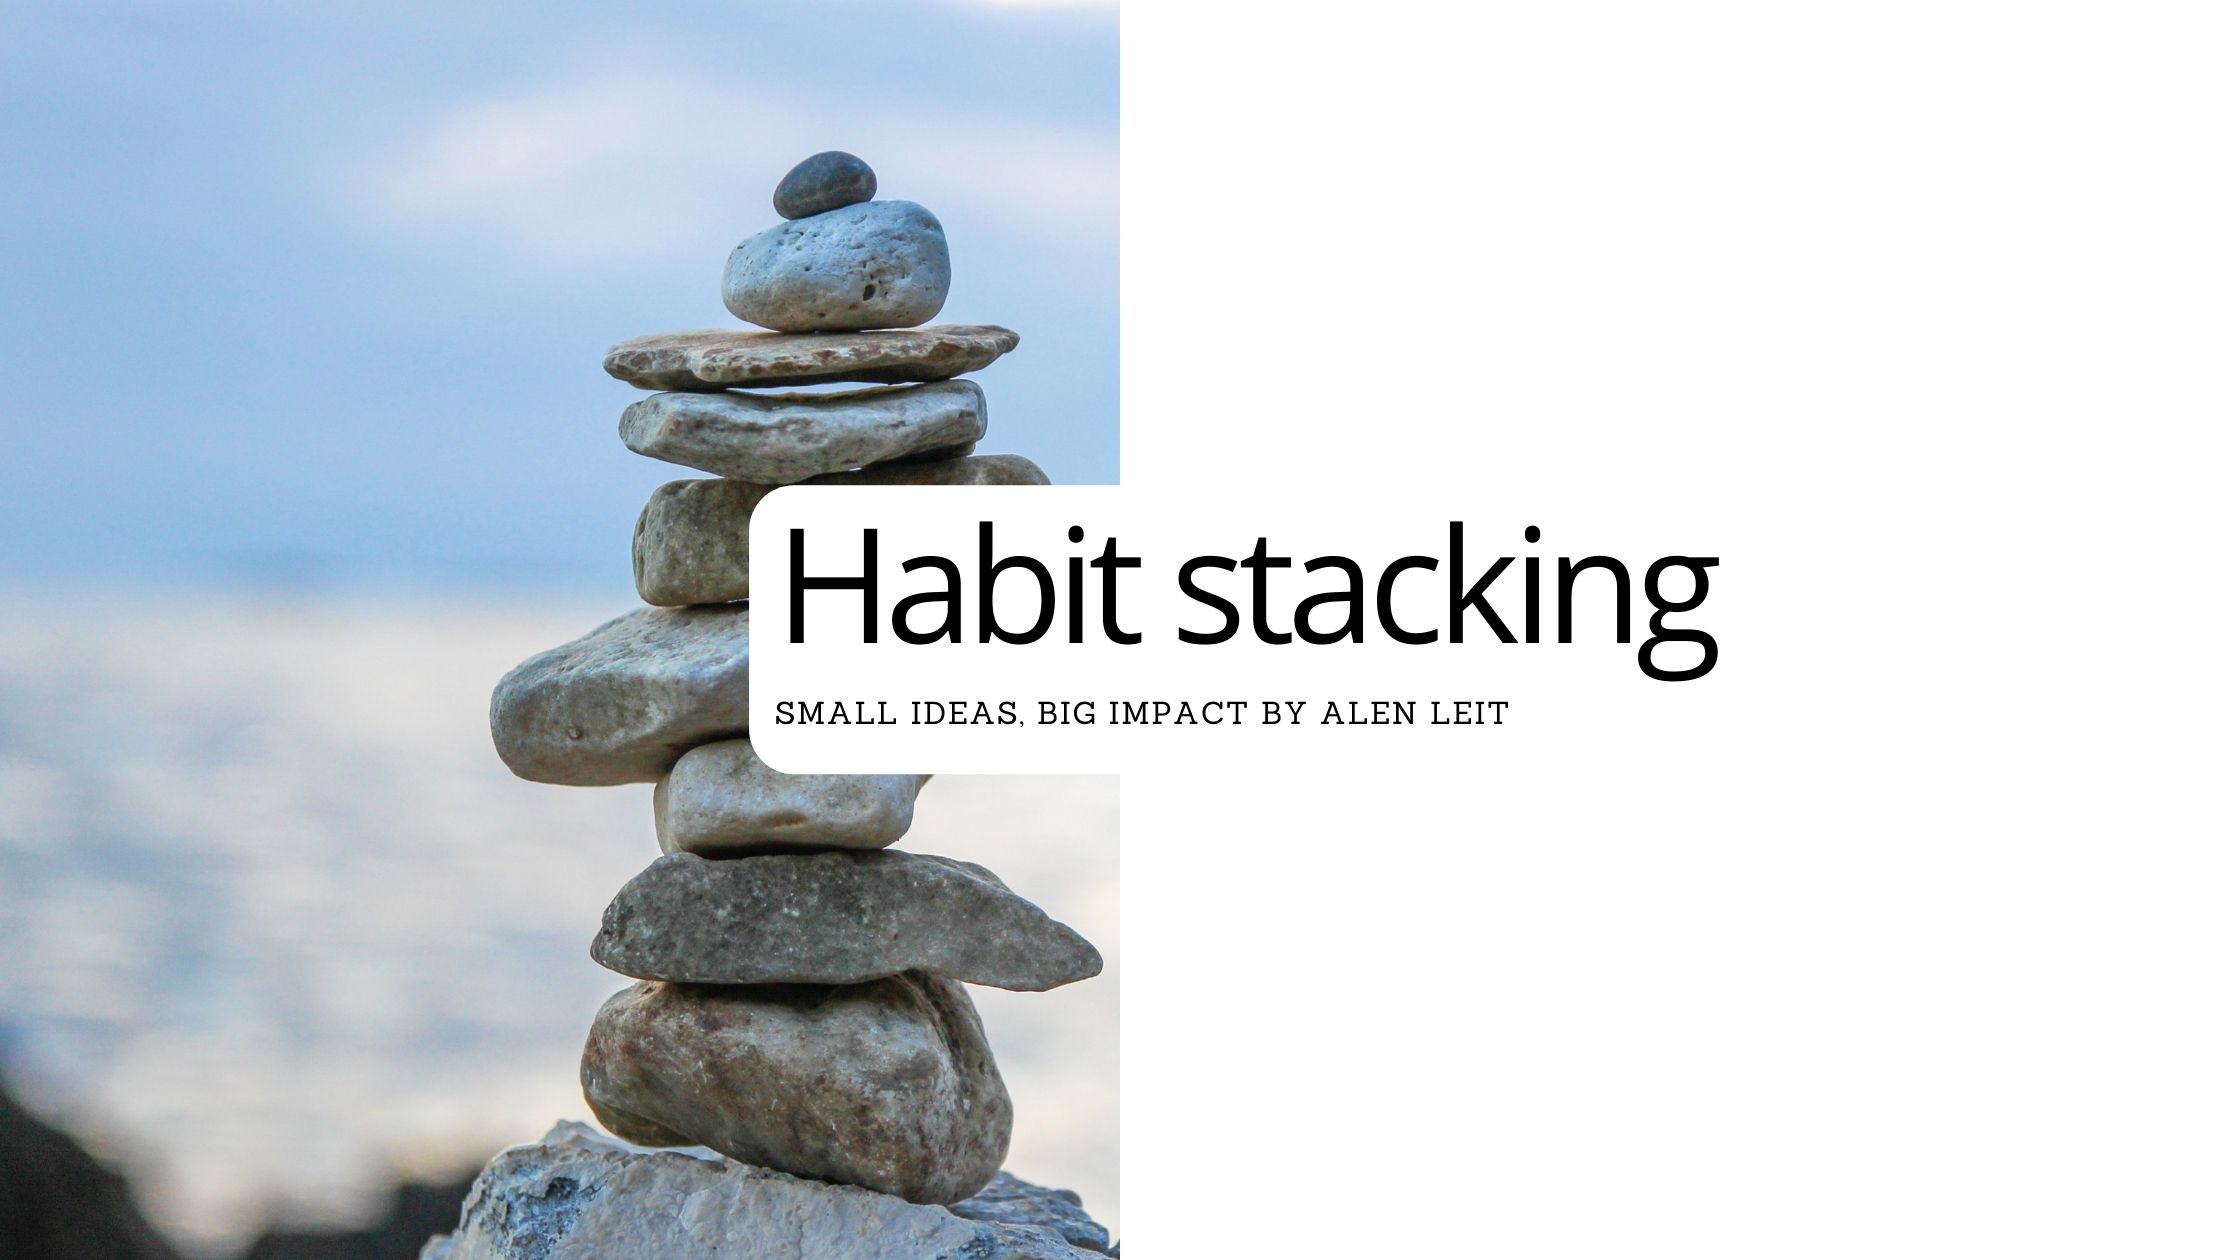 Stacking small habits